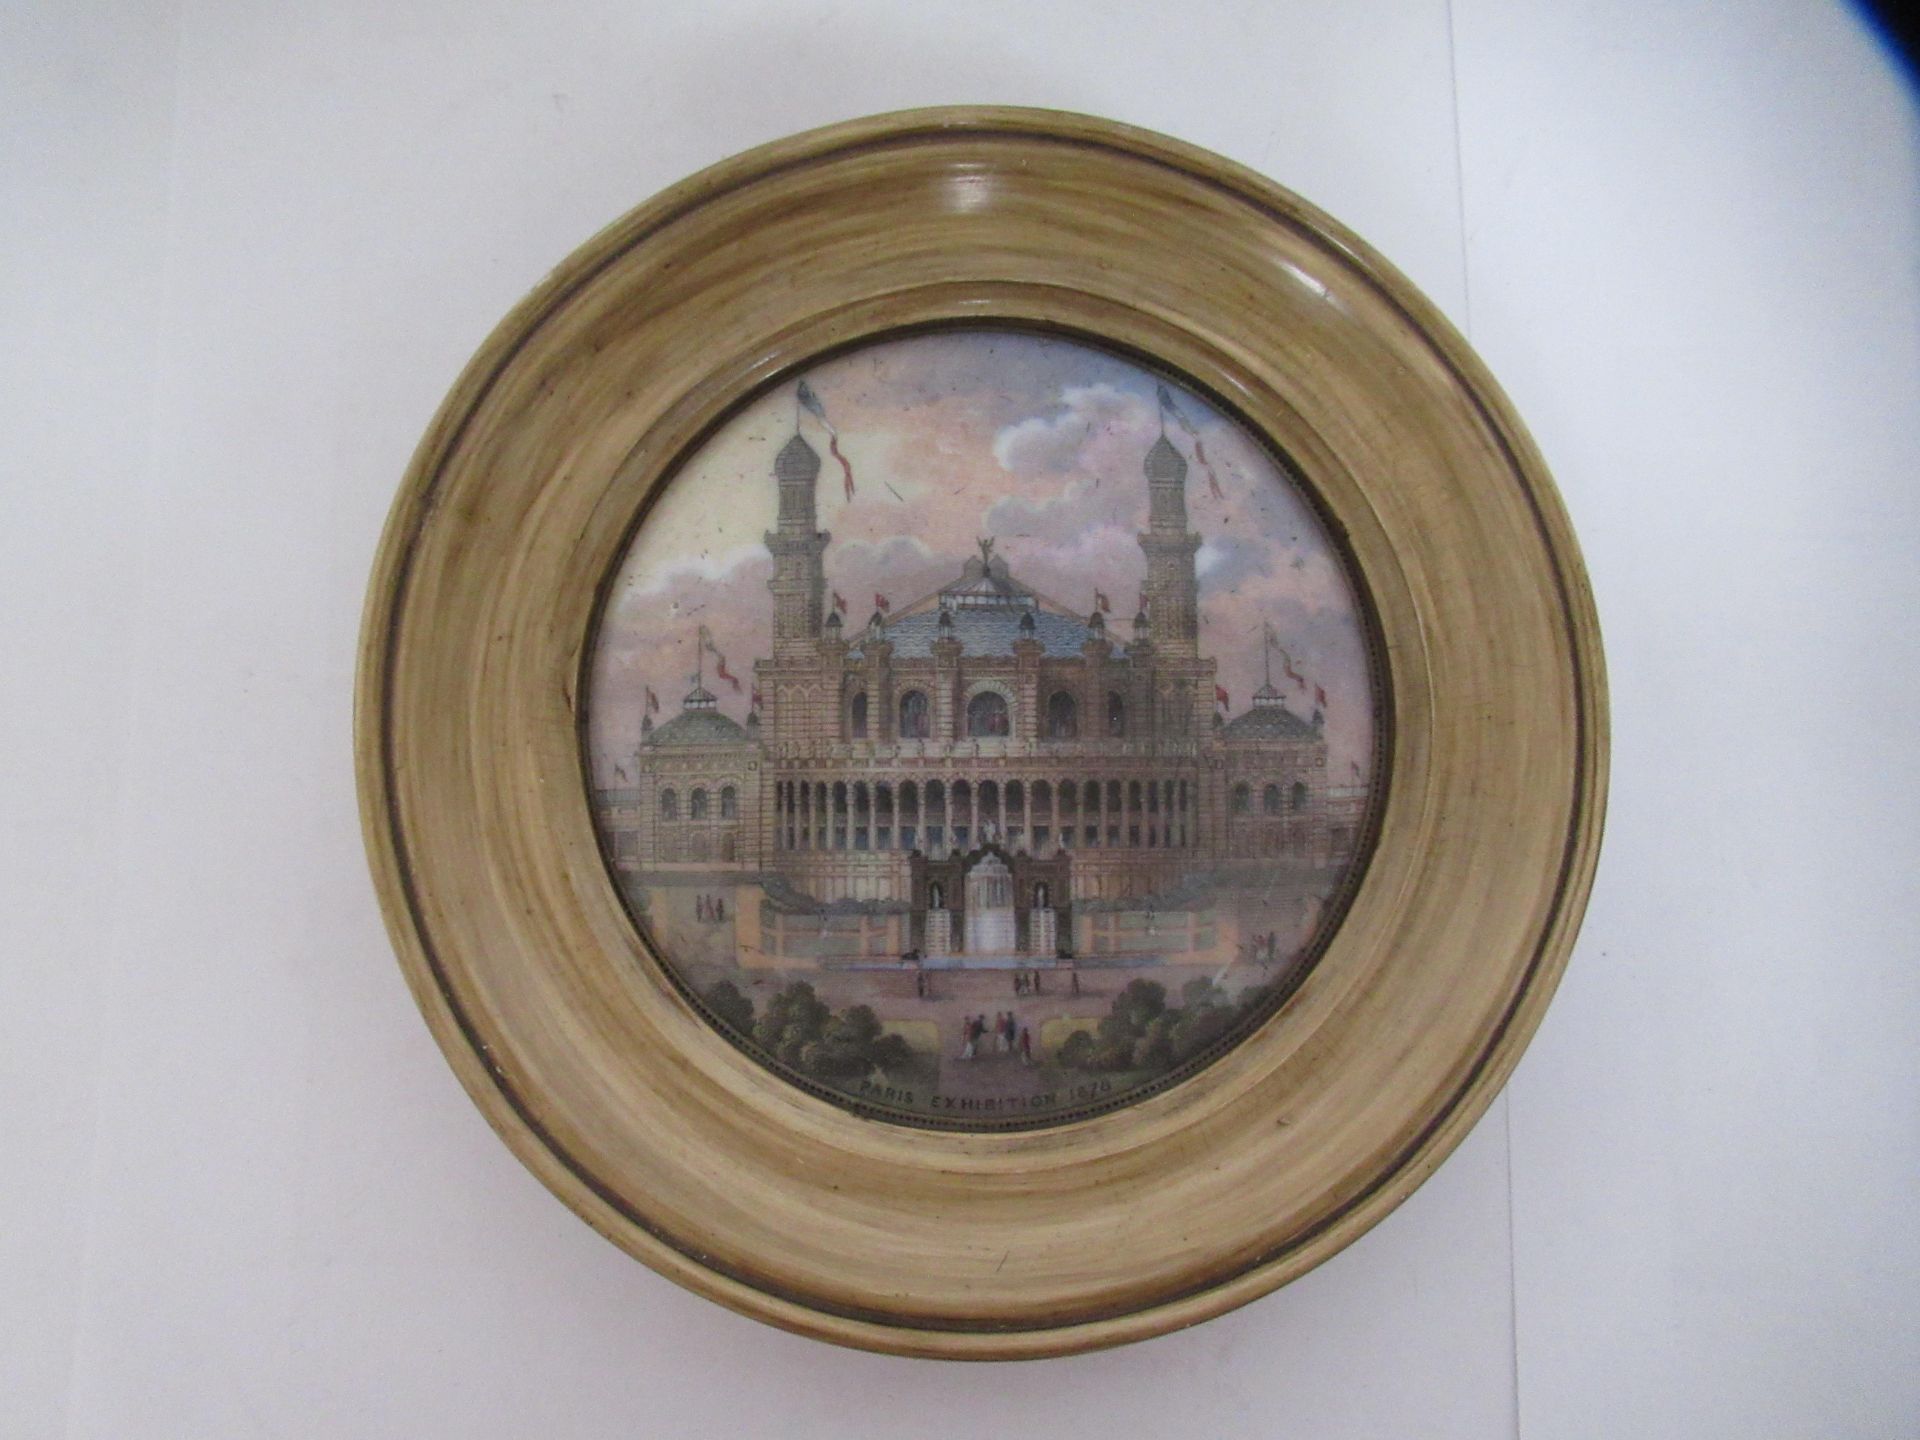 6x Prattware ceramic lids in wooden mounts including 'Paris Exhibition 1878', 'Pegwell Bay 1760' - Image 2 of 19